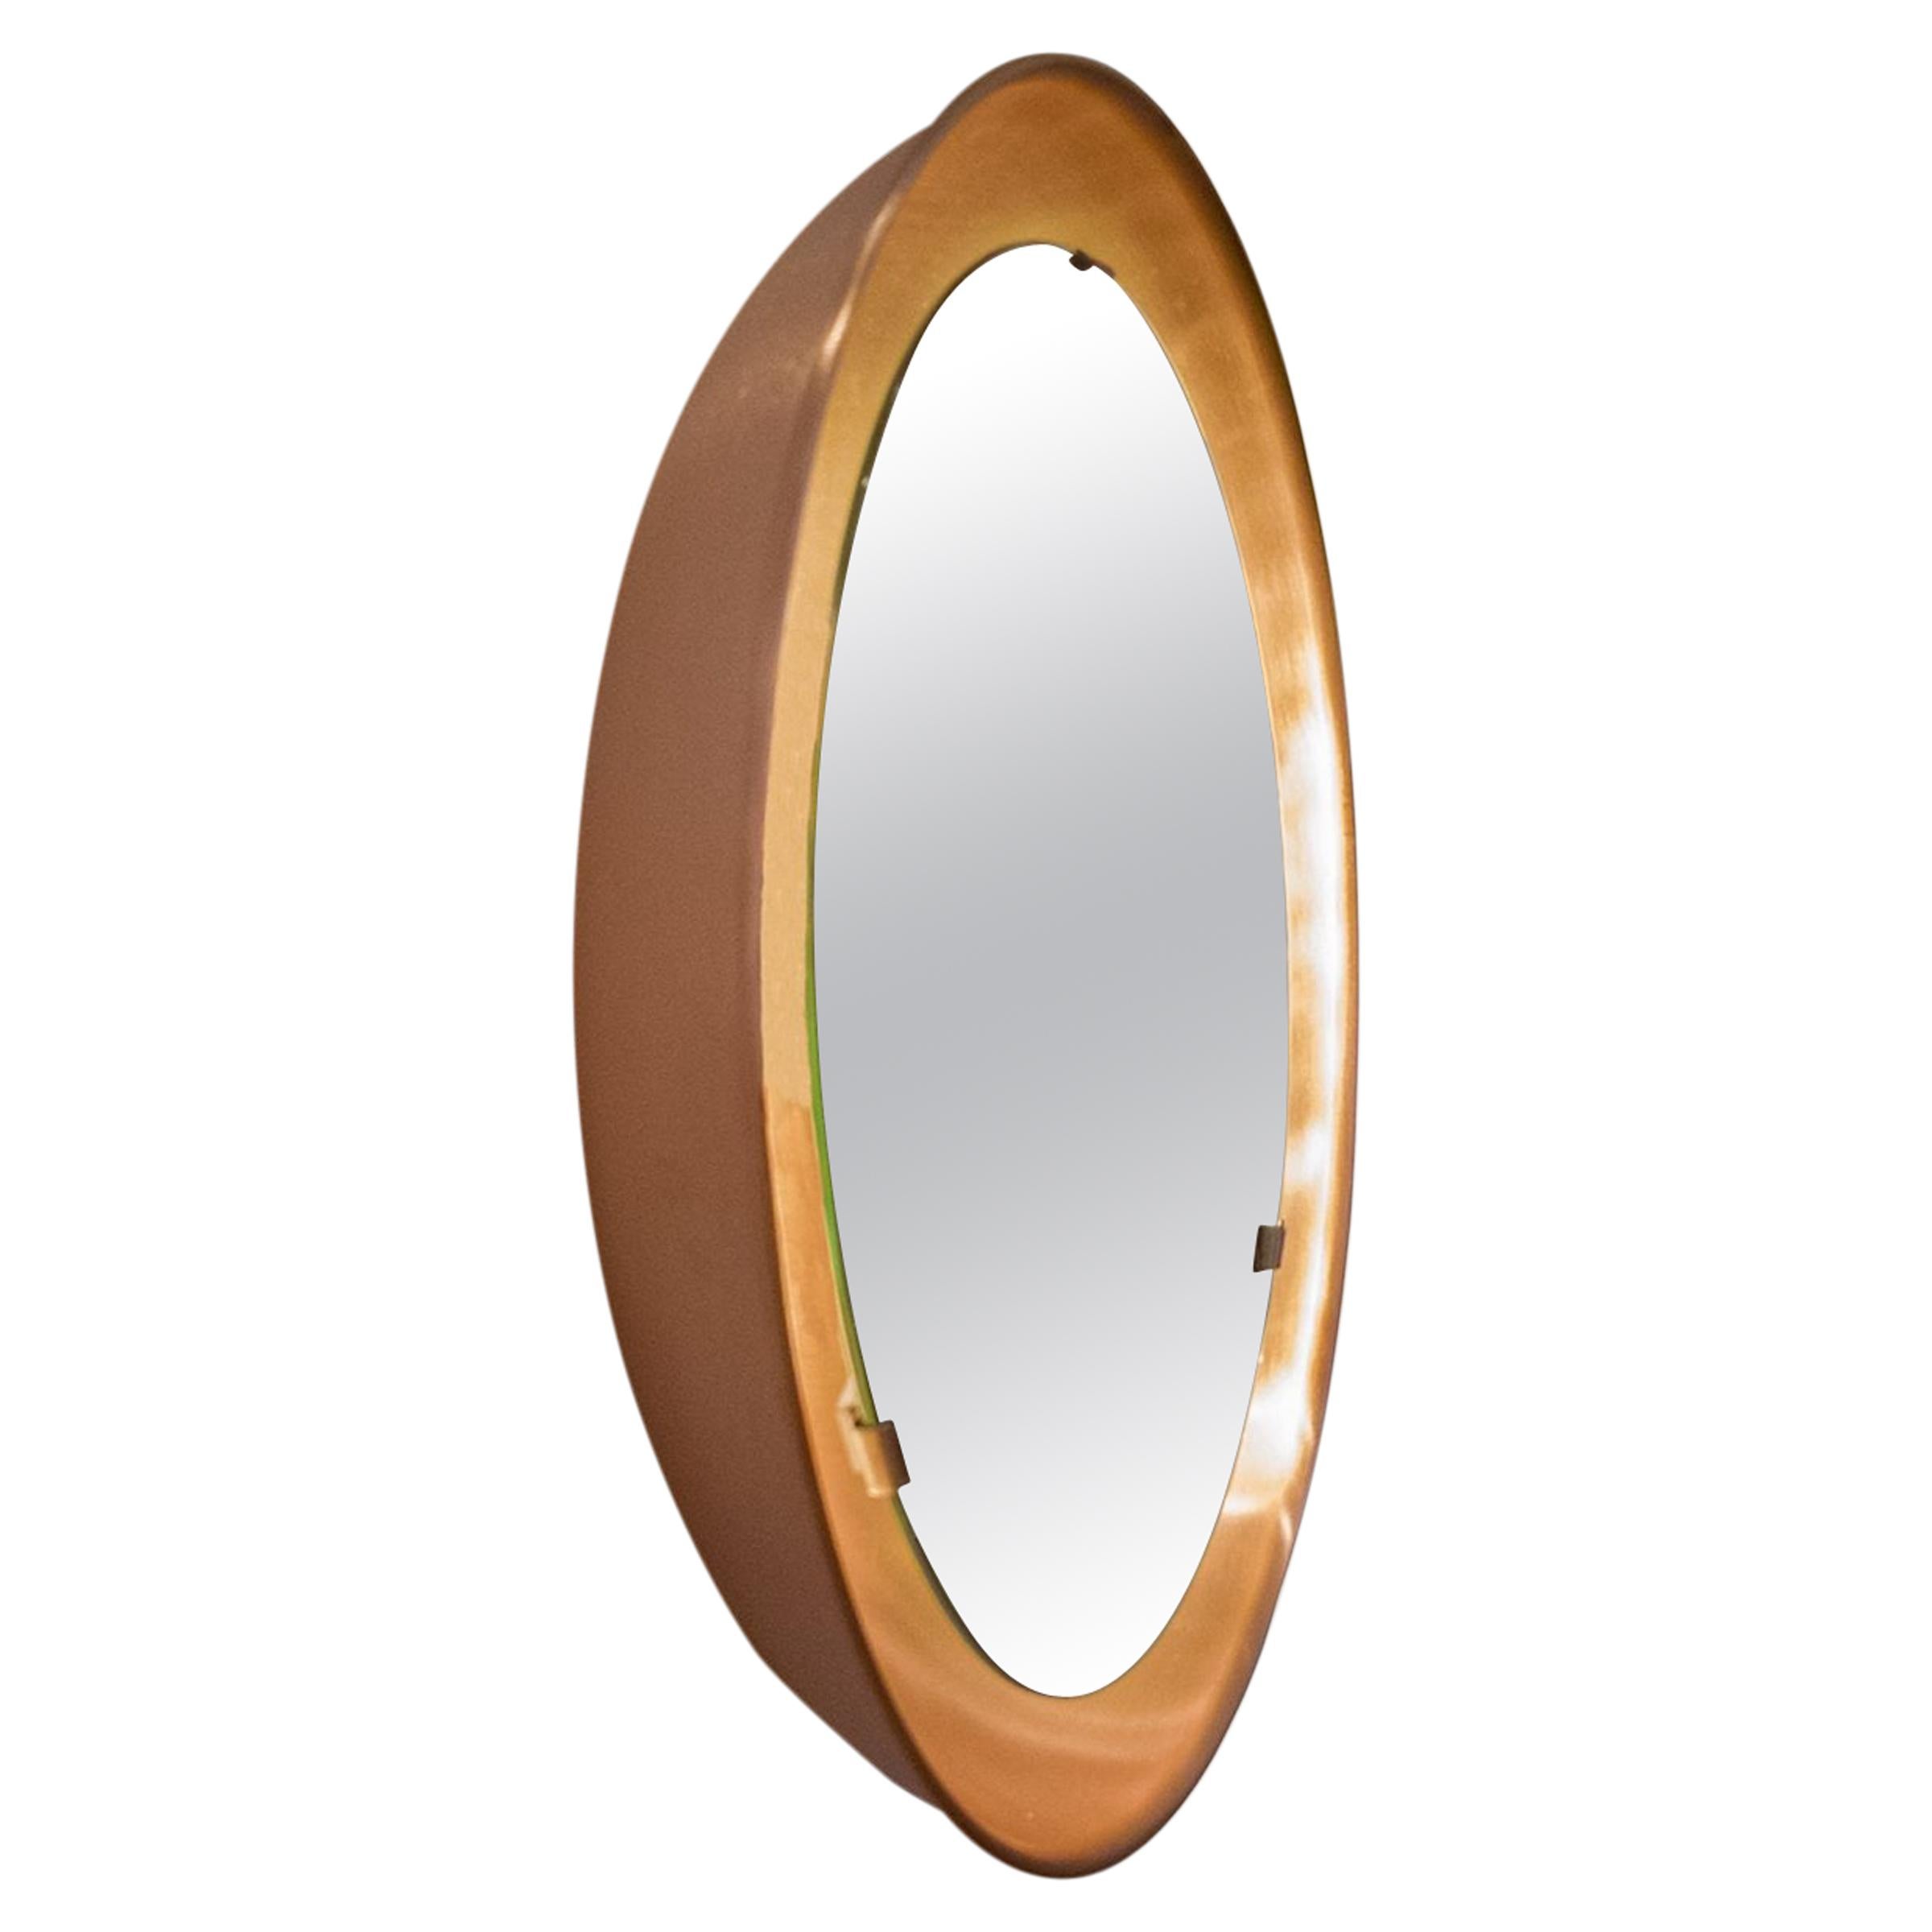 PH Mirror, Copper Brushed, 360 mm, On/Off Pull Cord, PH Initials For Sale